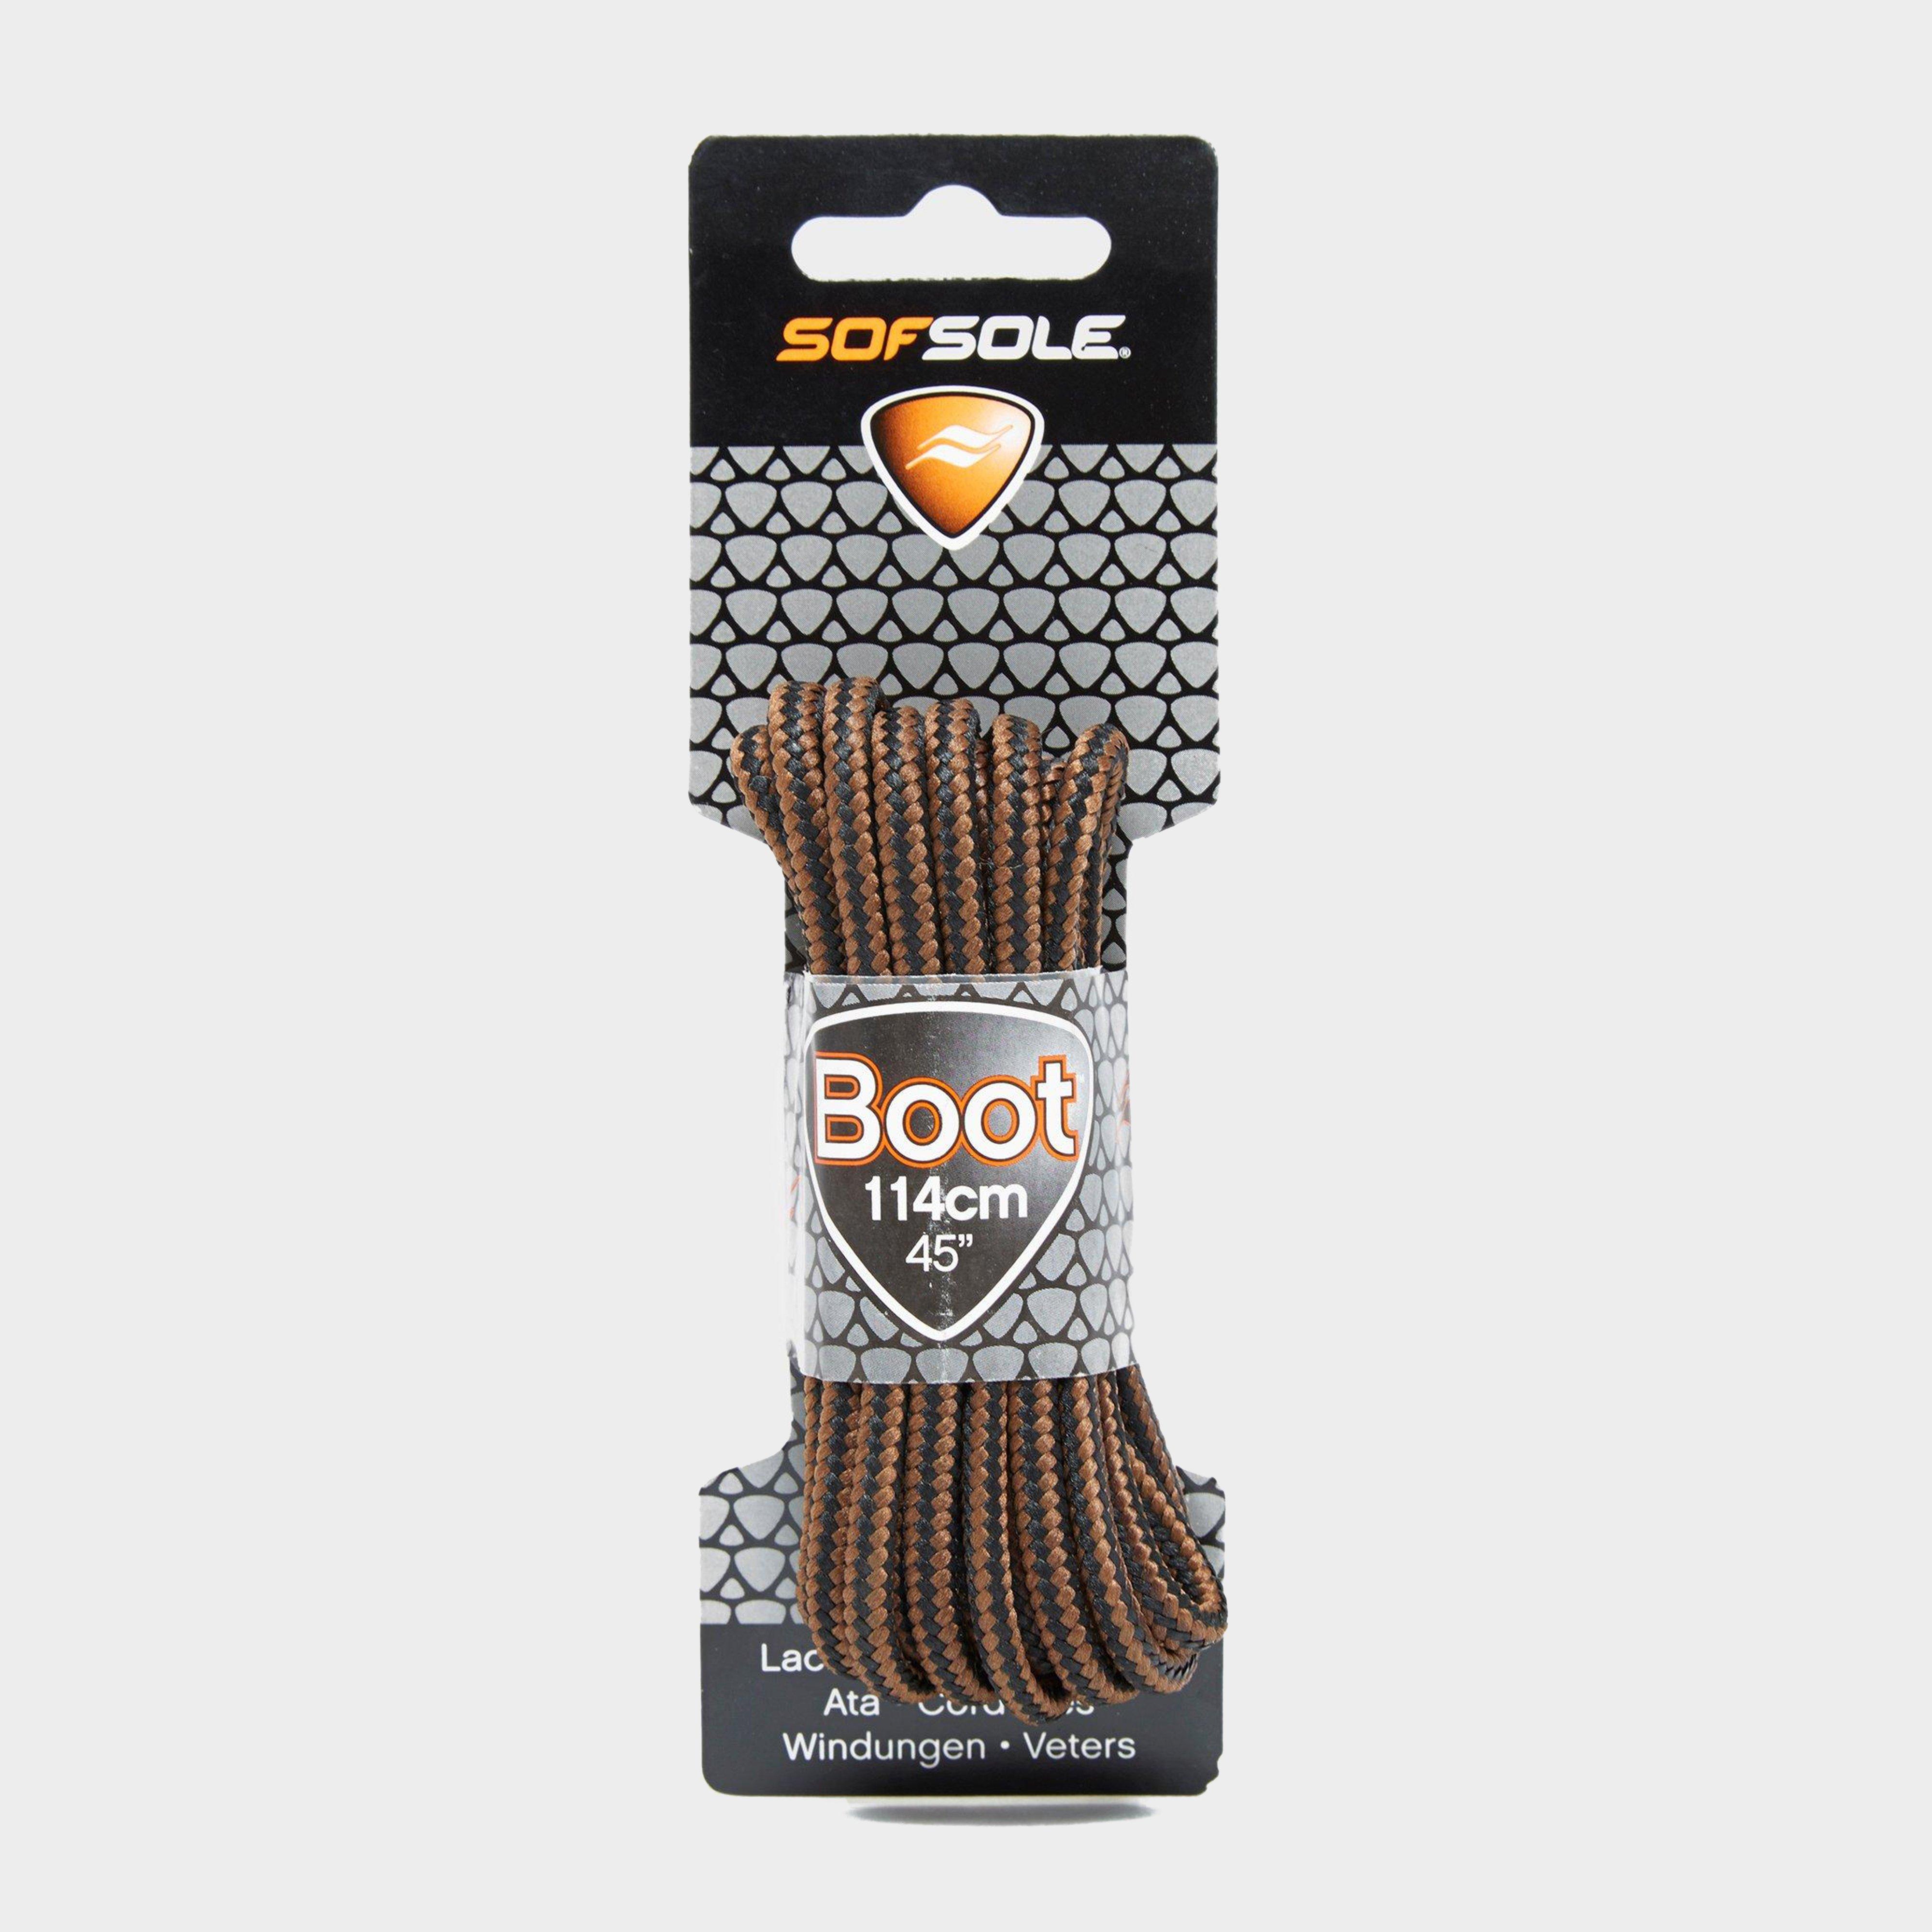 SOF Sole Wax Boot Laces 114cm